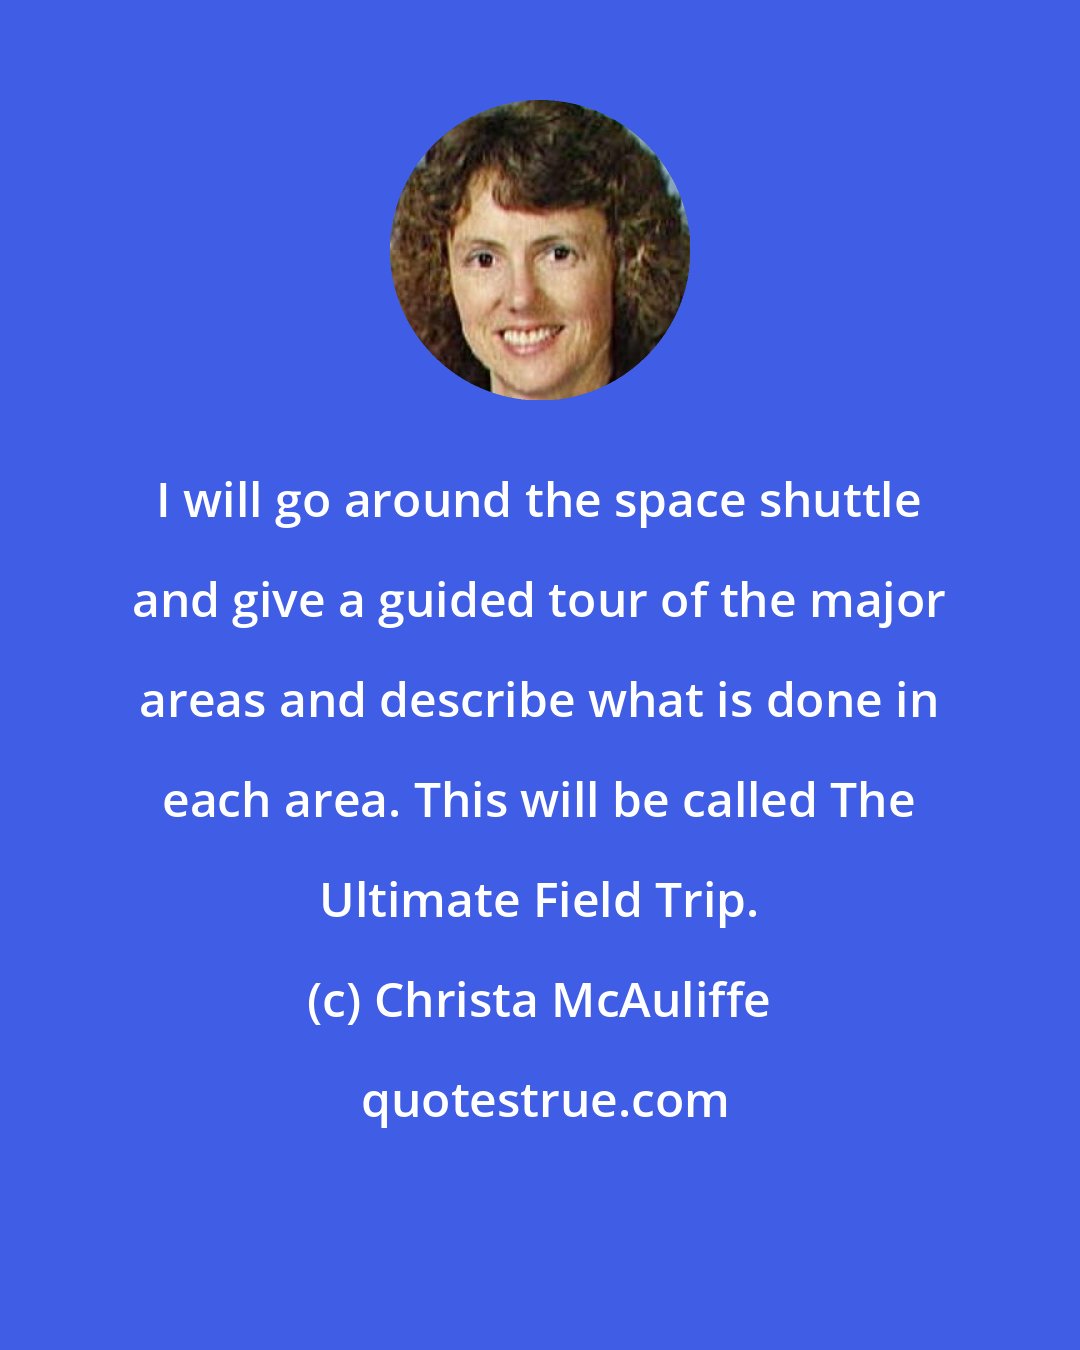 Christa McAuliffe: I will go around the space shuttle and give a guided tour of the major areas and describe what is done in each area. This will be called The Ultimate Field Trip.